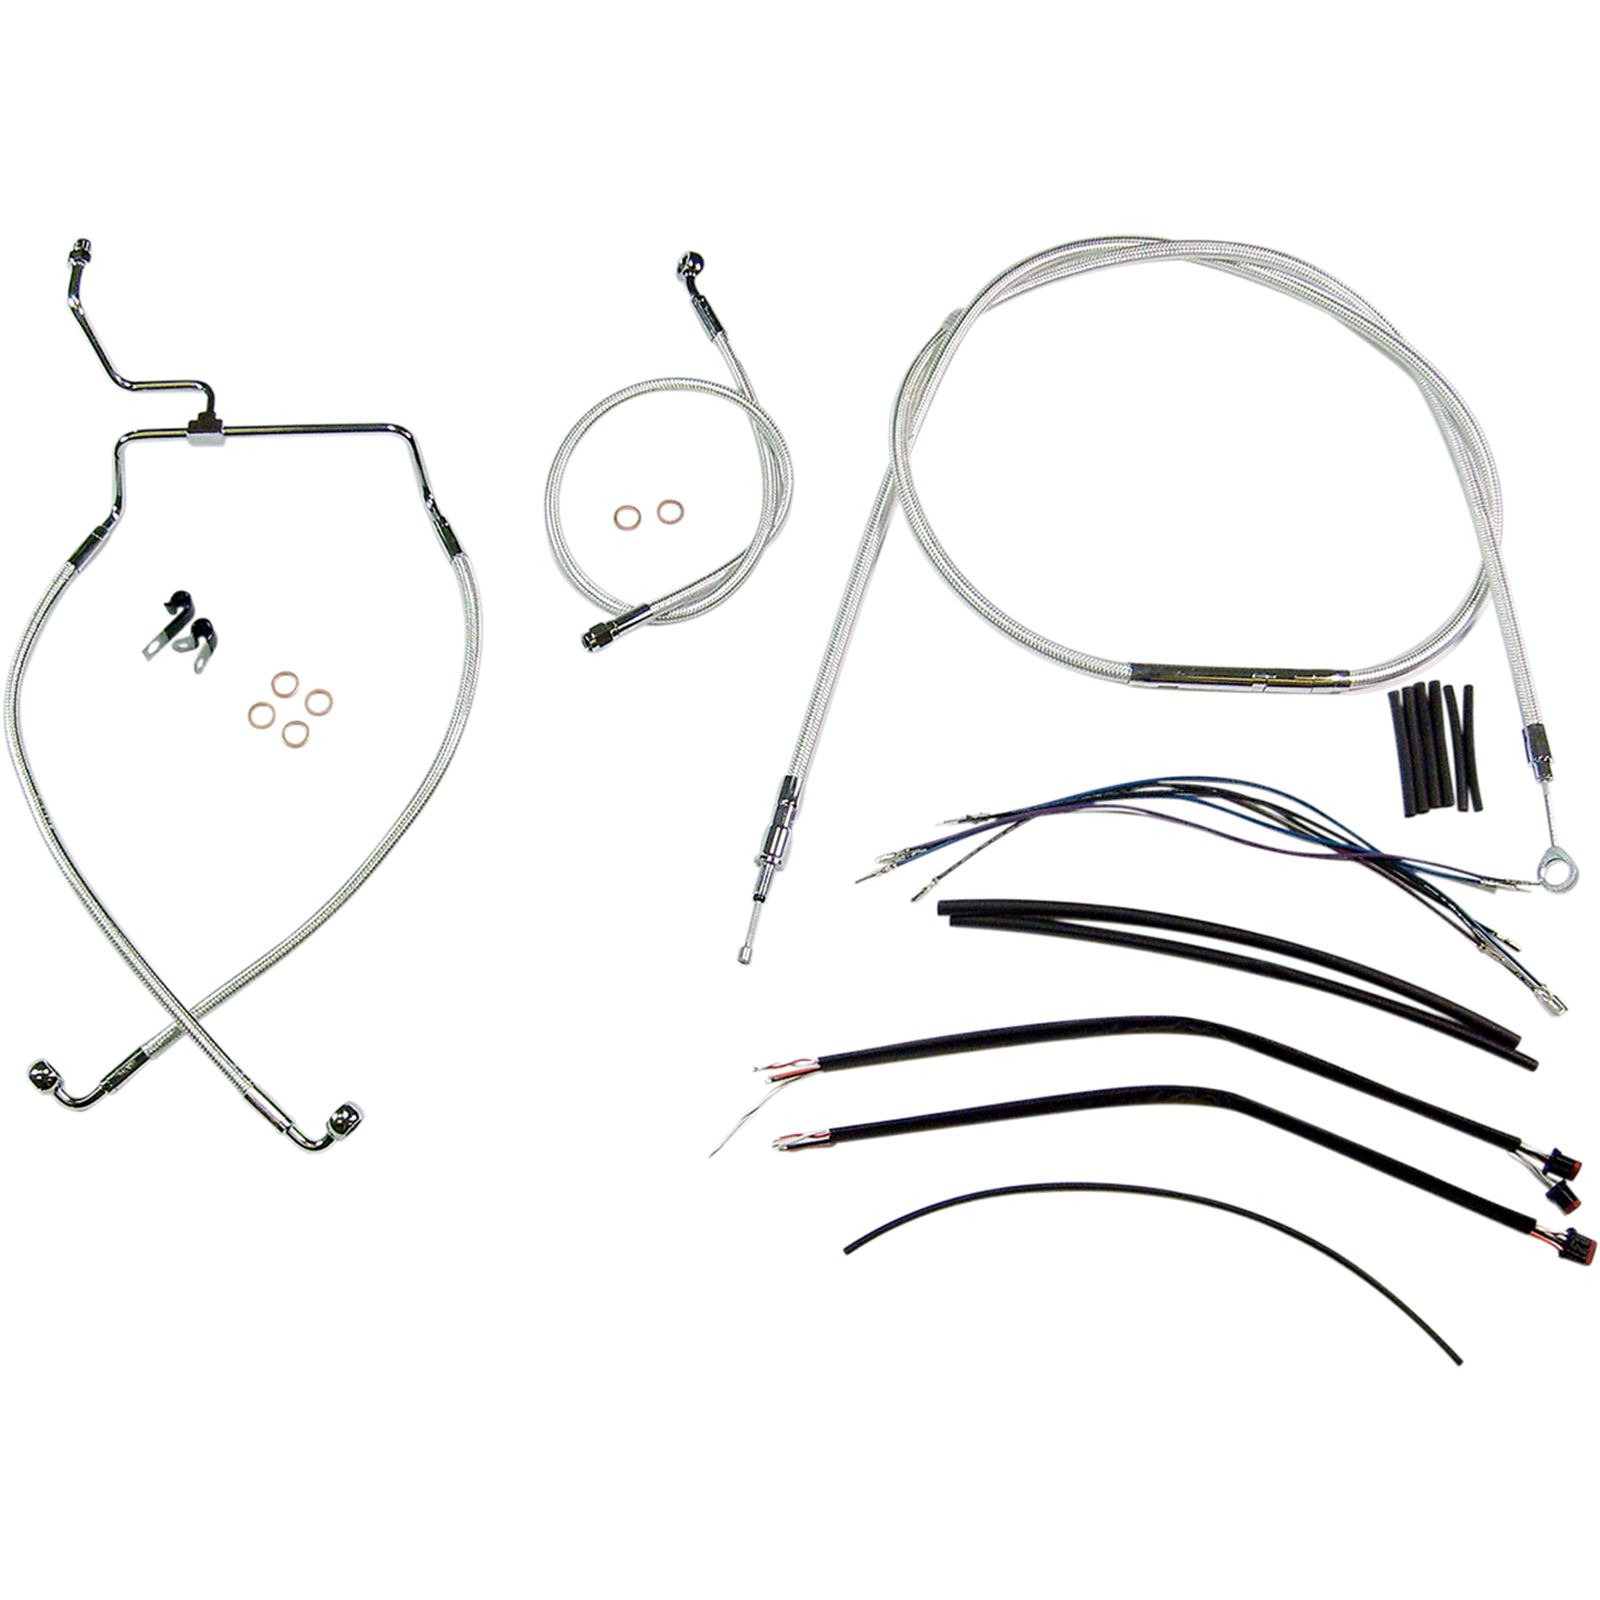 Magnum Sterling Chromite II Control Cable Kit